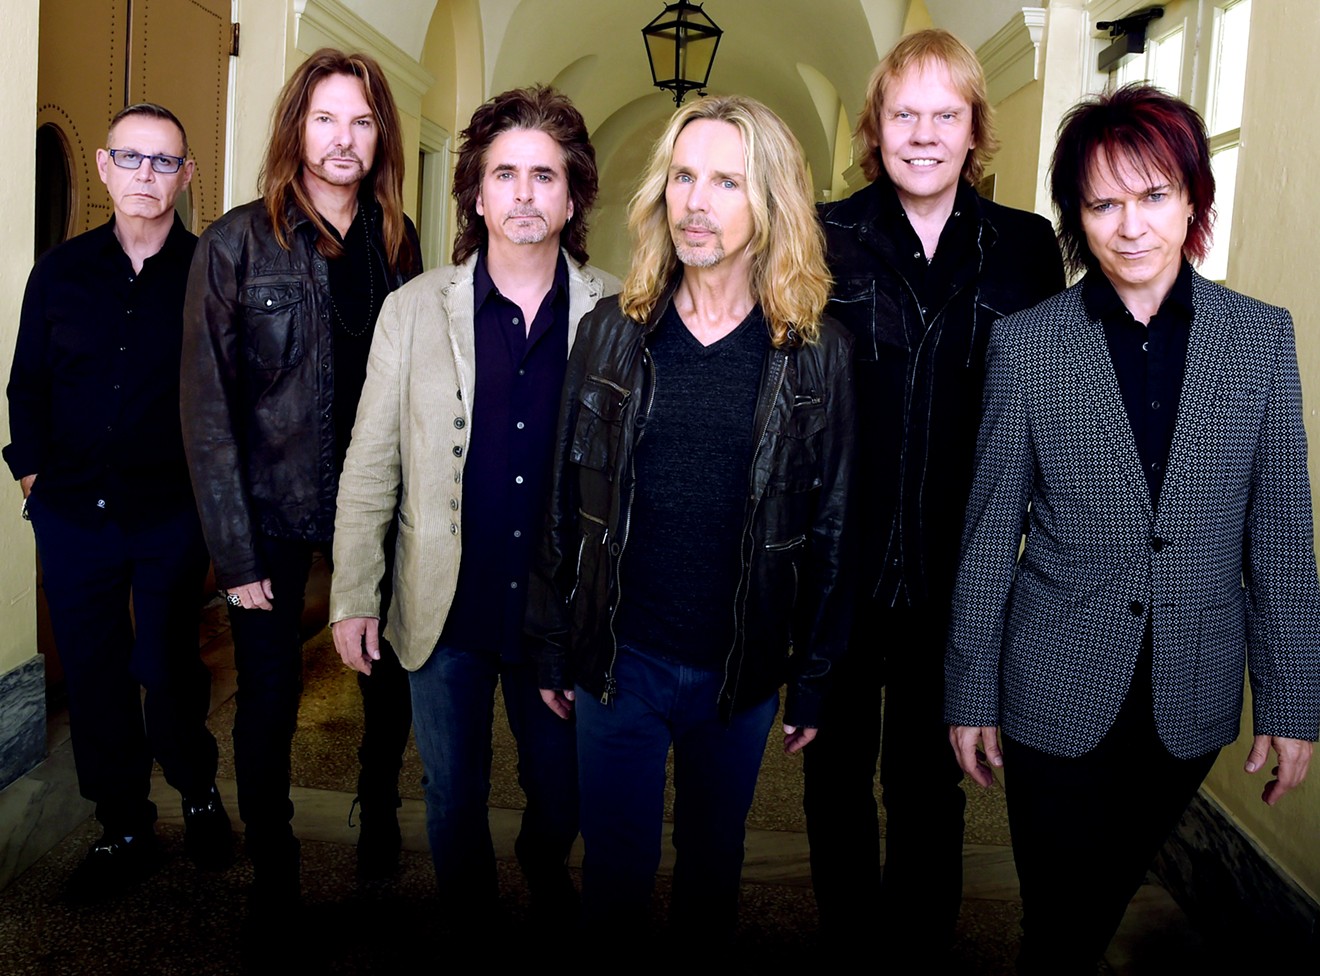 Styx returns to DFW on Saturday — from left: Chuck Panozzo, Ricky Phillips, Todd Sucherman, Tommy Shaw, James “JY” Young, Lawrence Gowan.